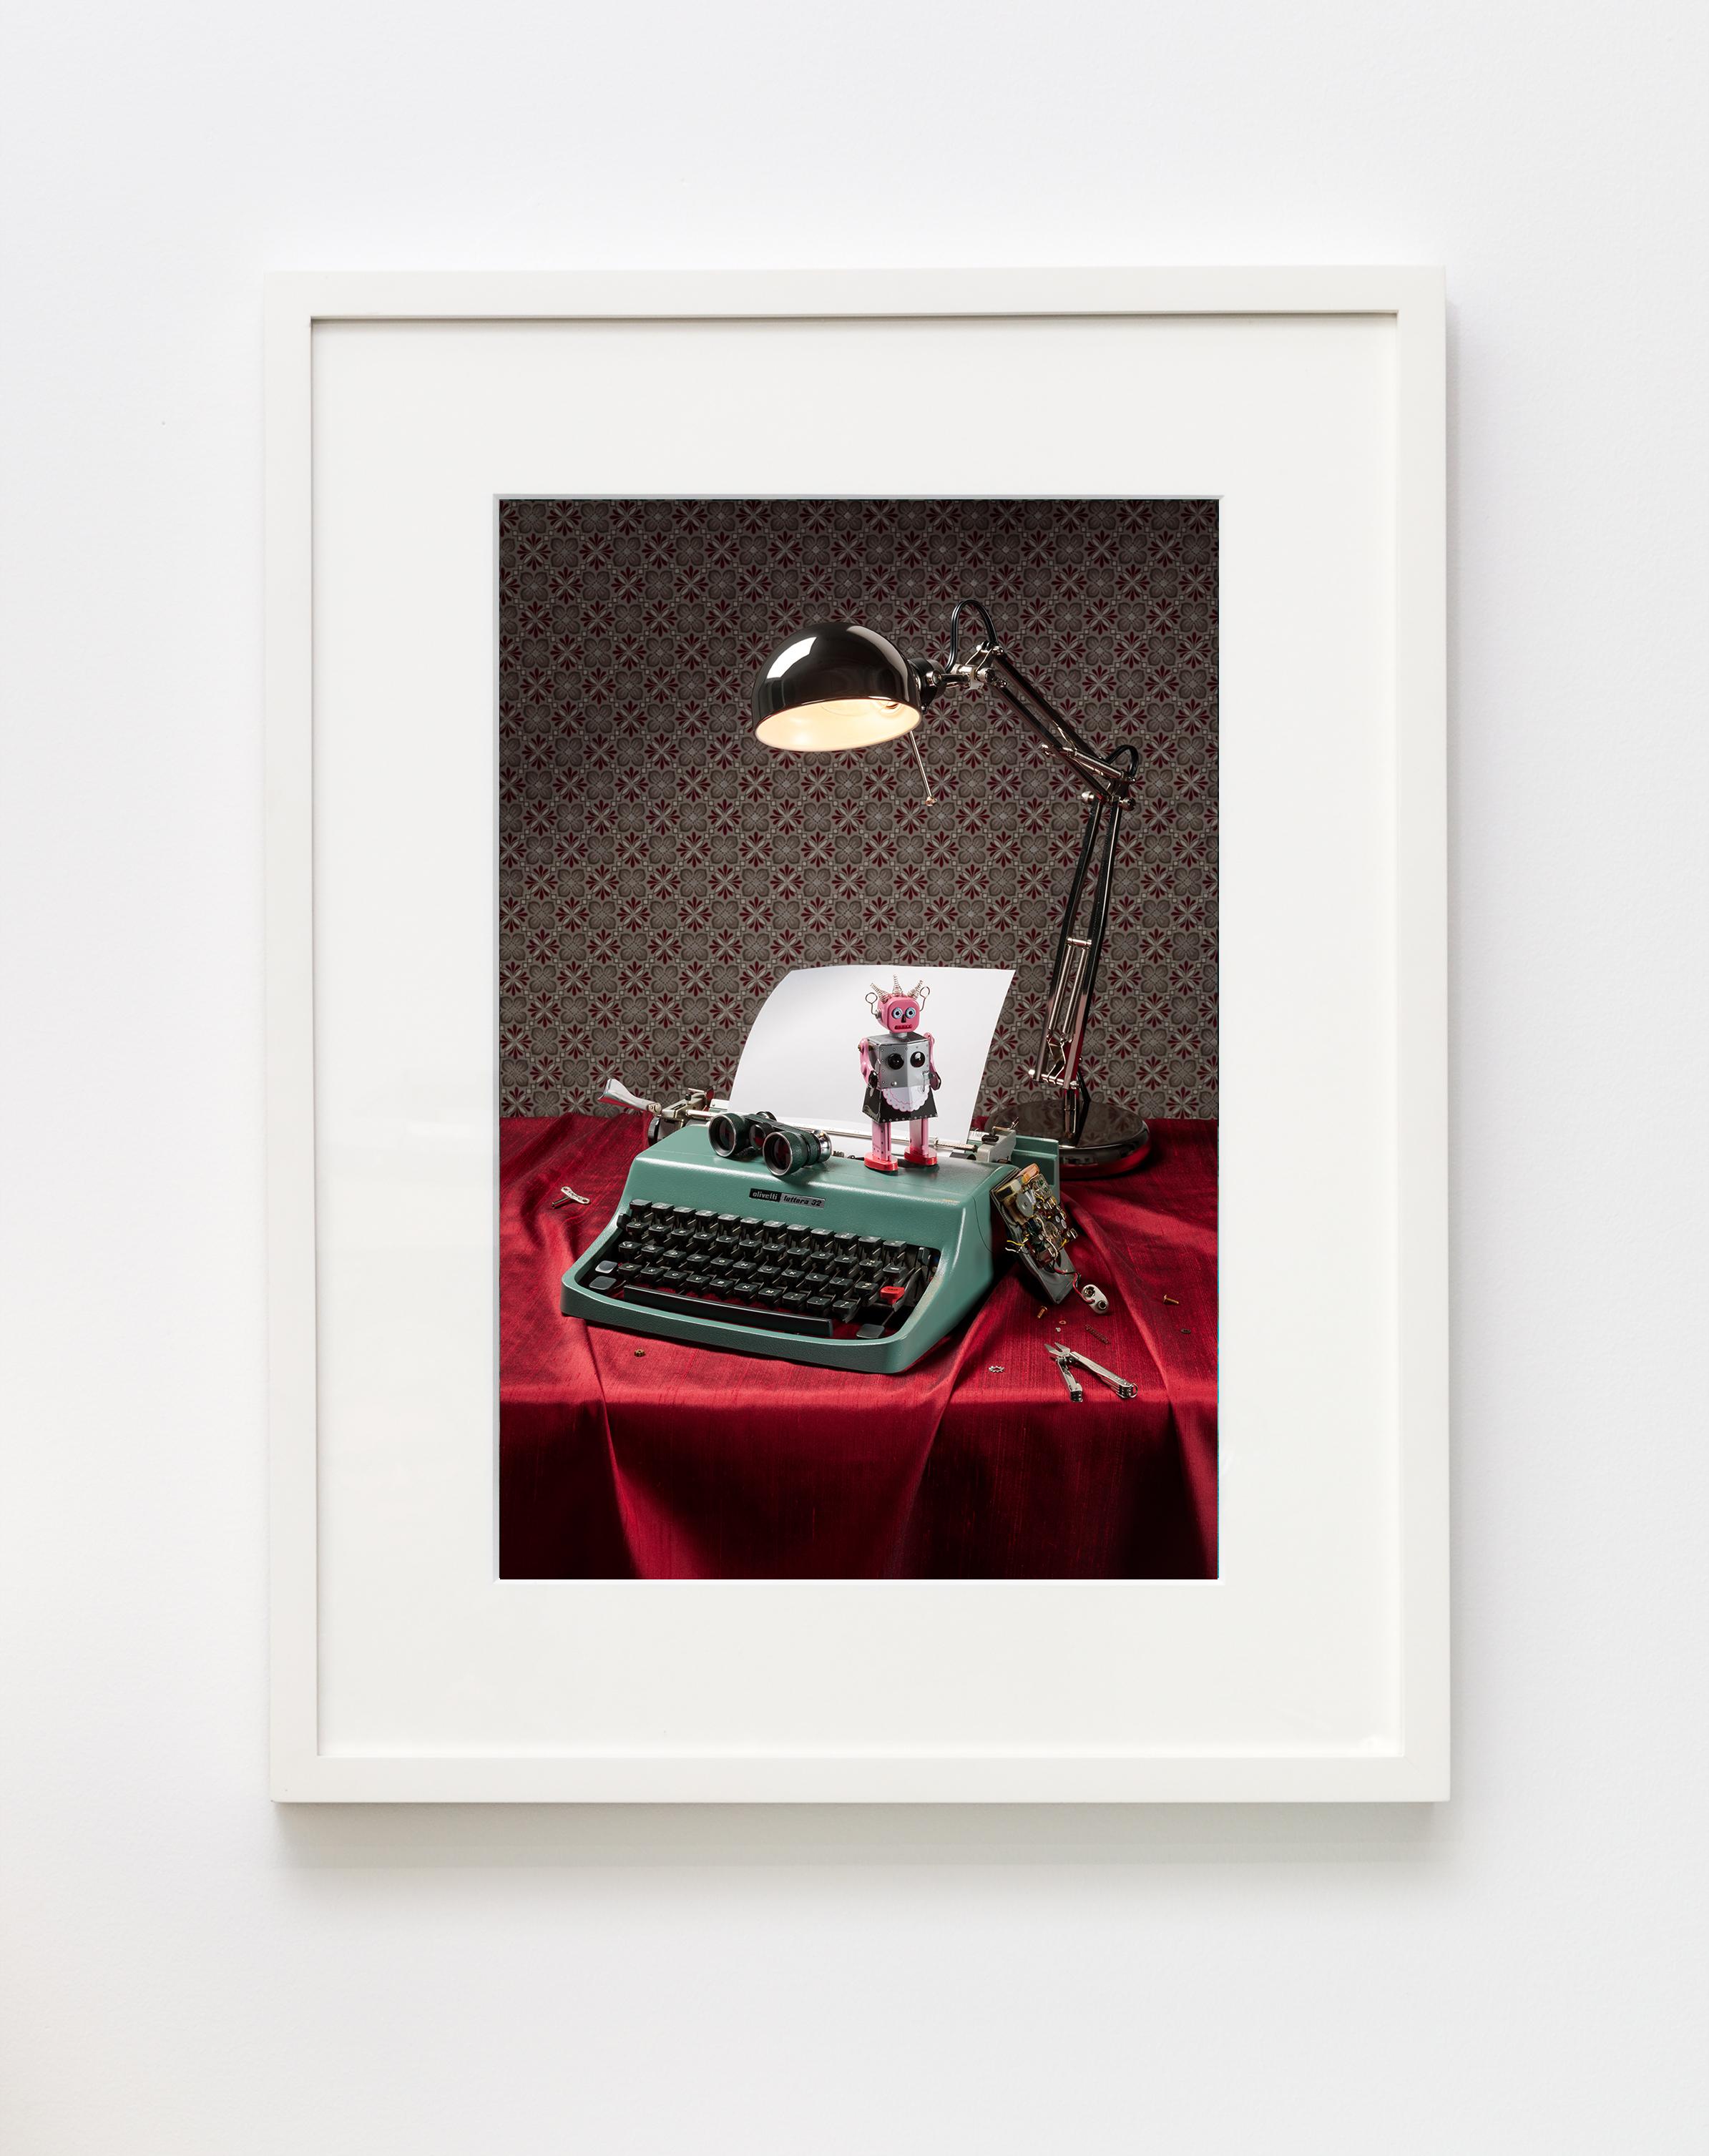 New Still-life Photograph with Vintage Typewriter, “Still Life with Robot”  - Print by Jeanette May